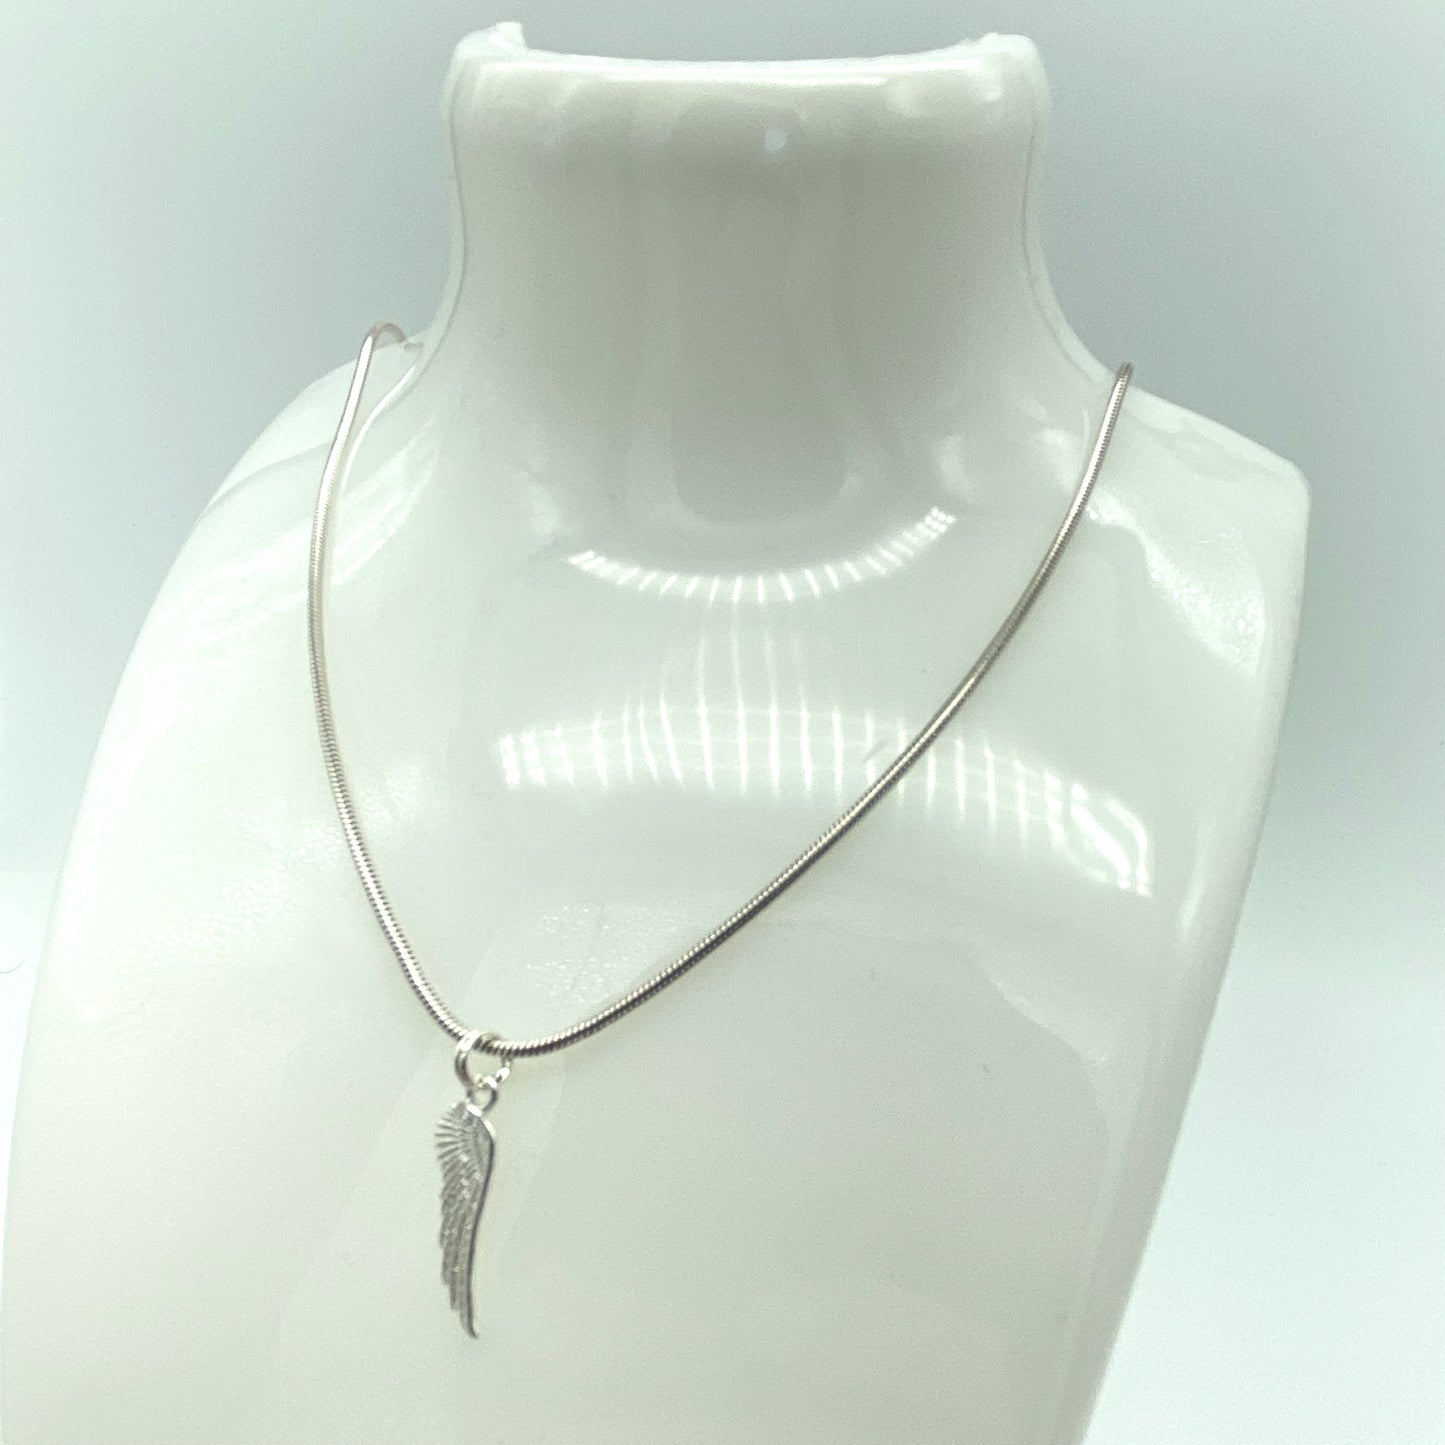 Sterling Silver Necklace with Angel Wing Pendant by My Silver Wish